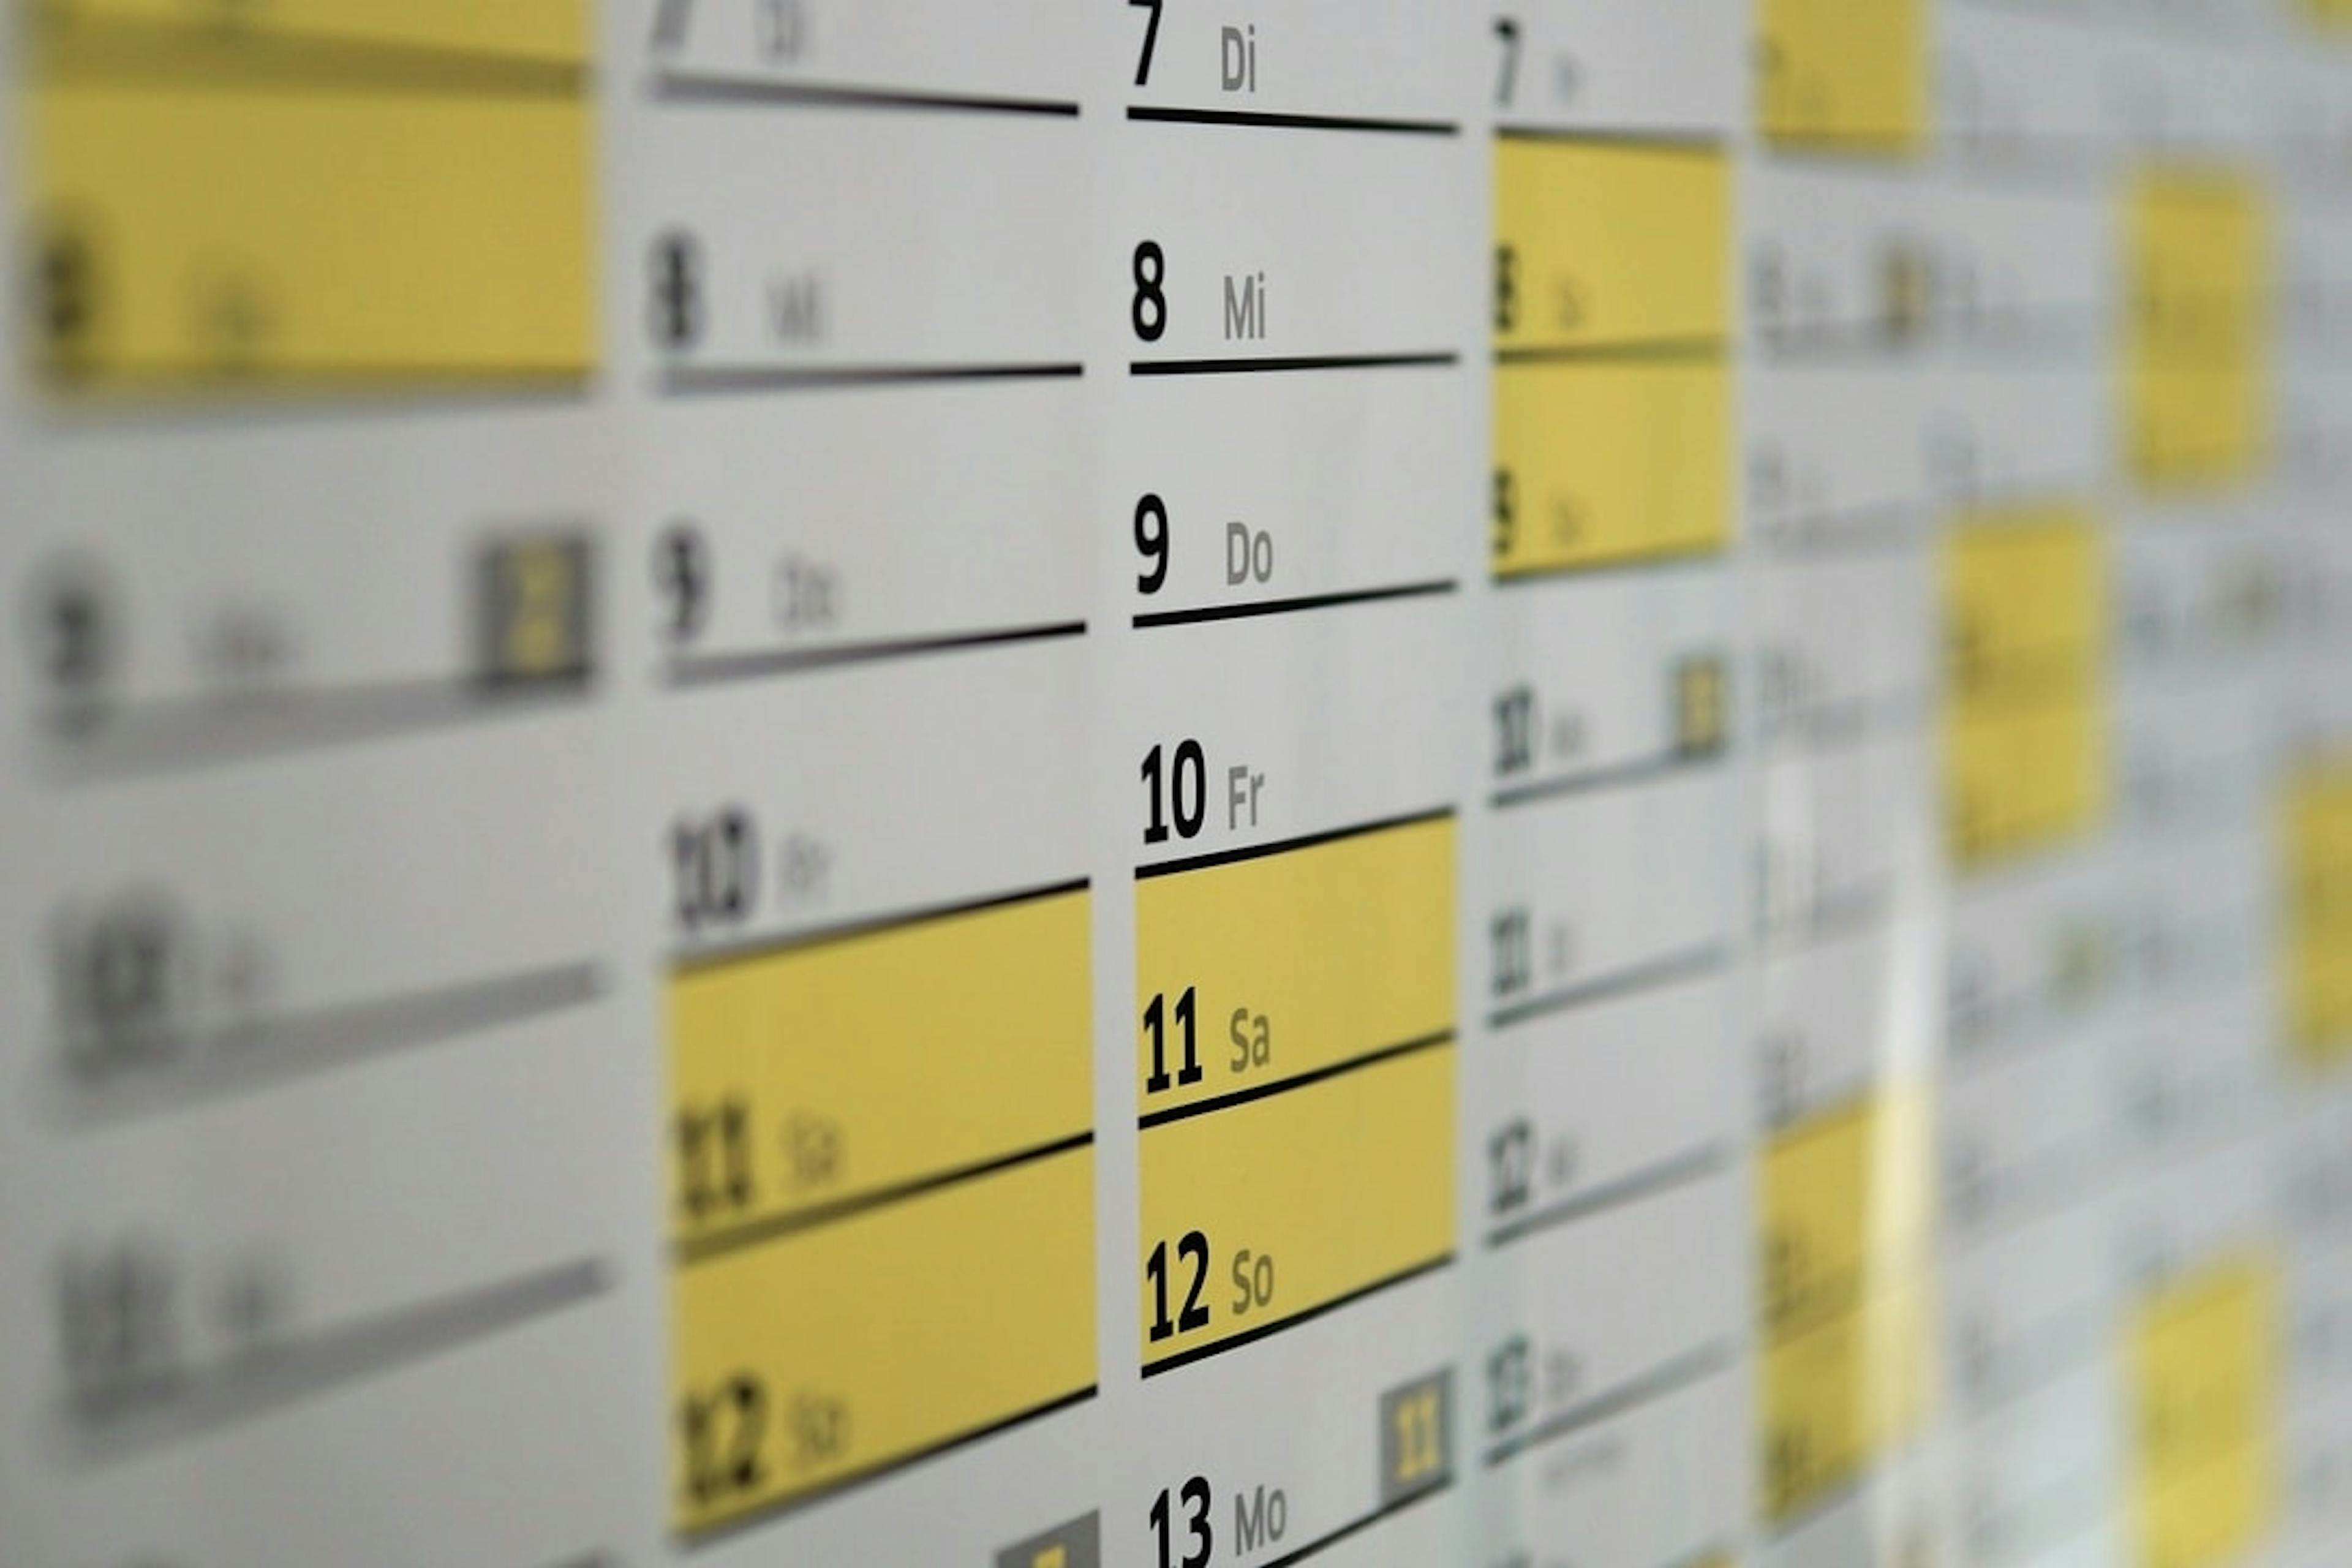 vertical calendar with weekends highlighted in yellow